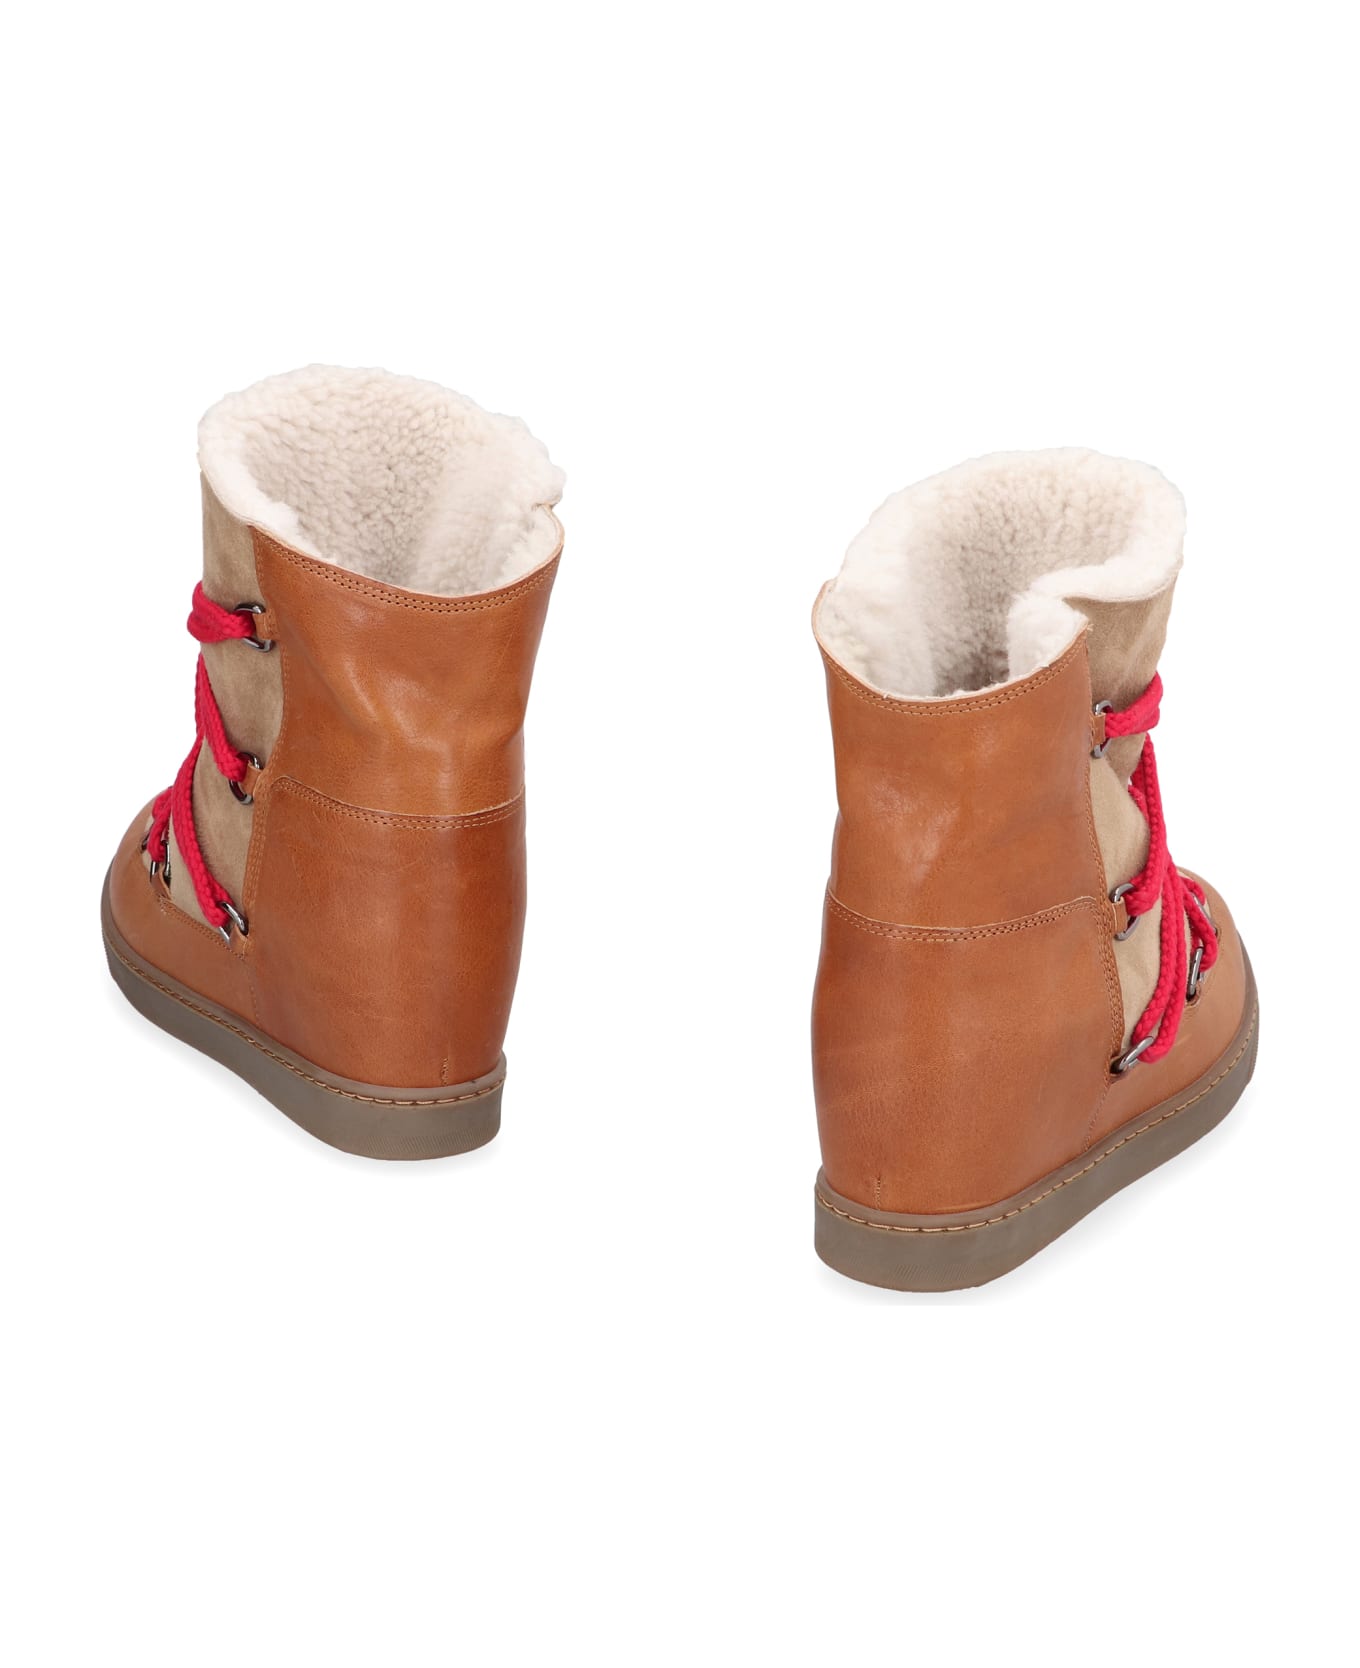 Isabel Marant Nowles Hiking Boots - Camel